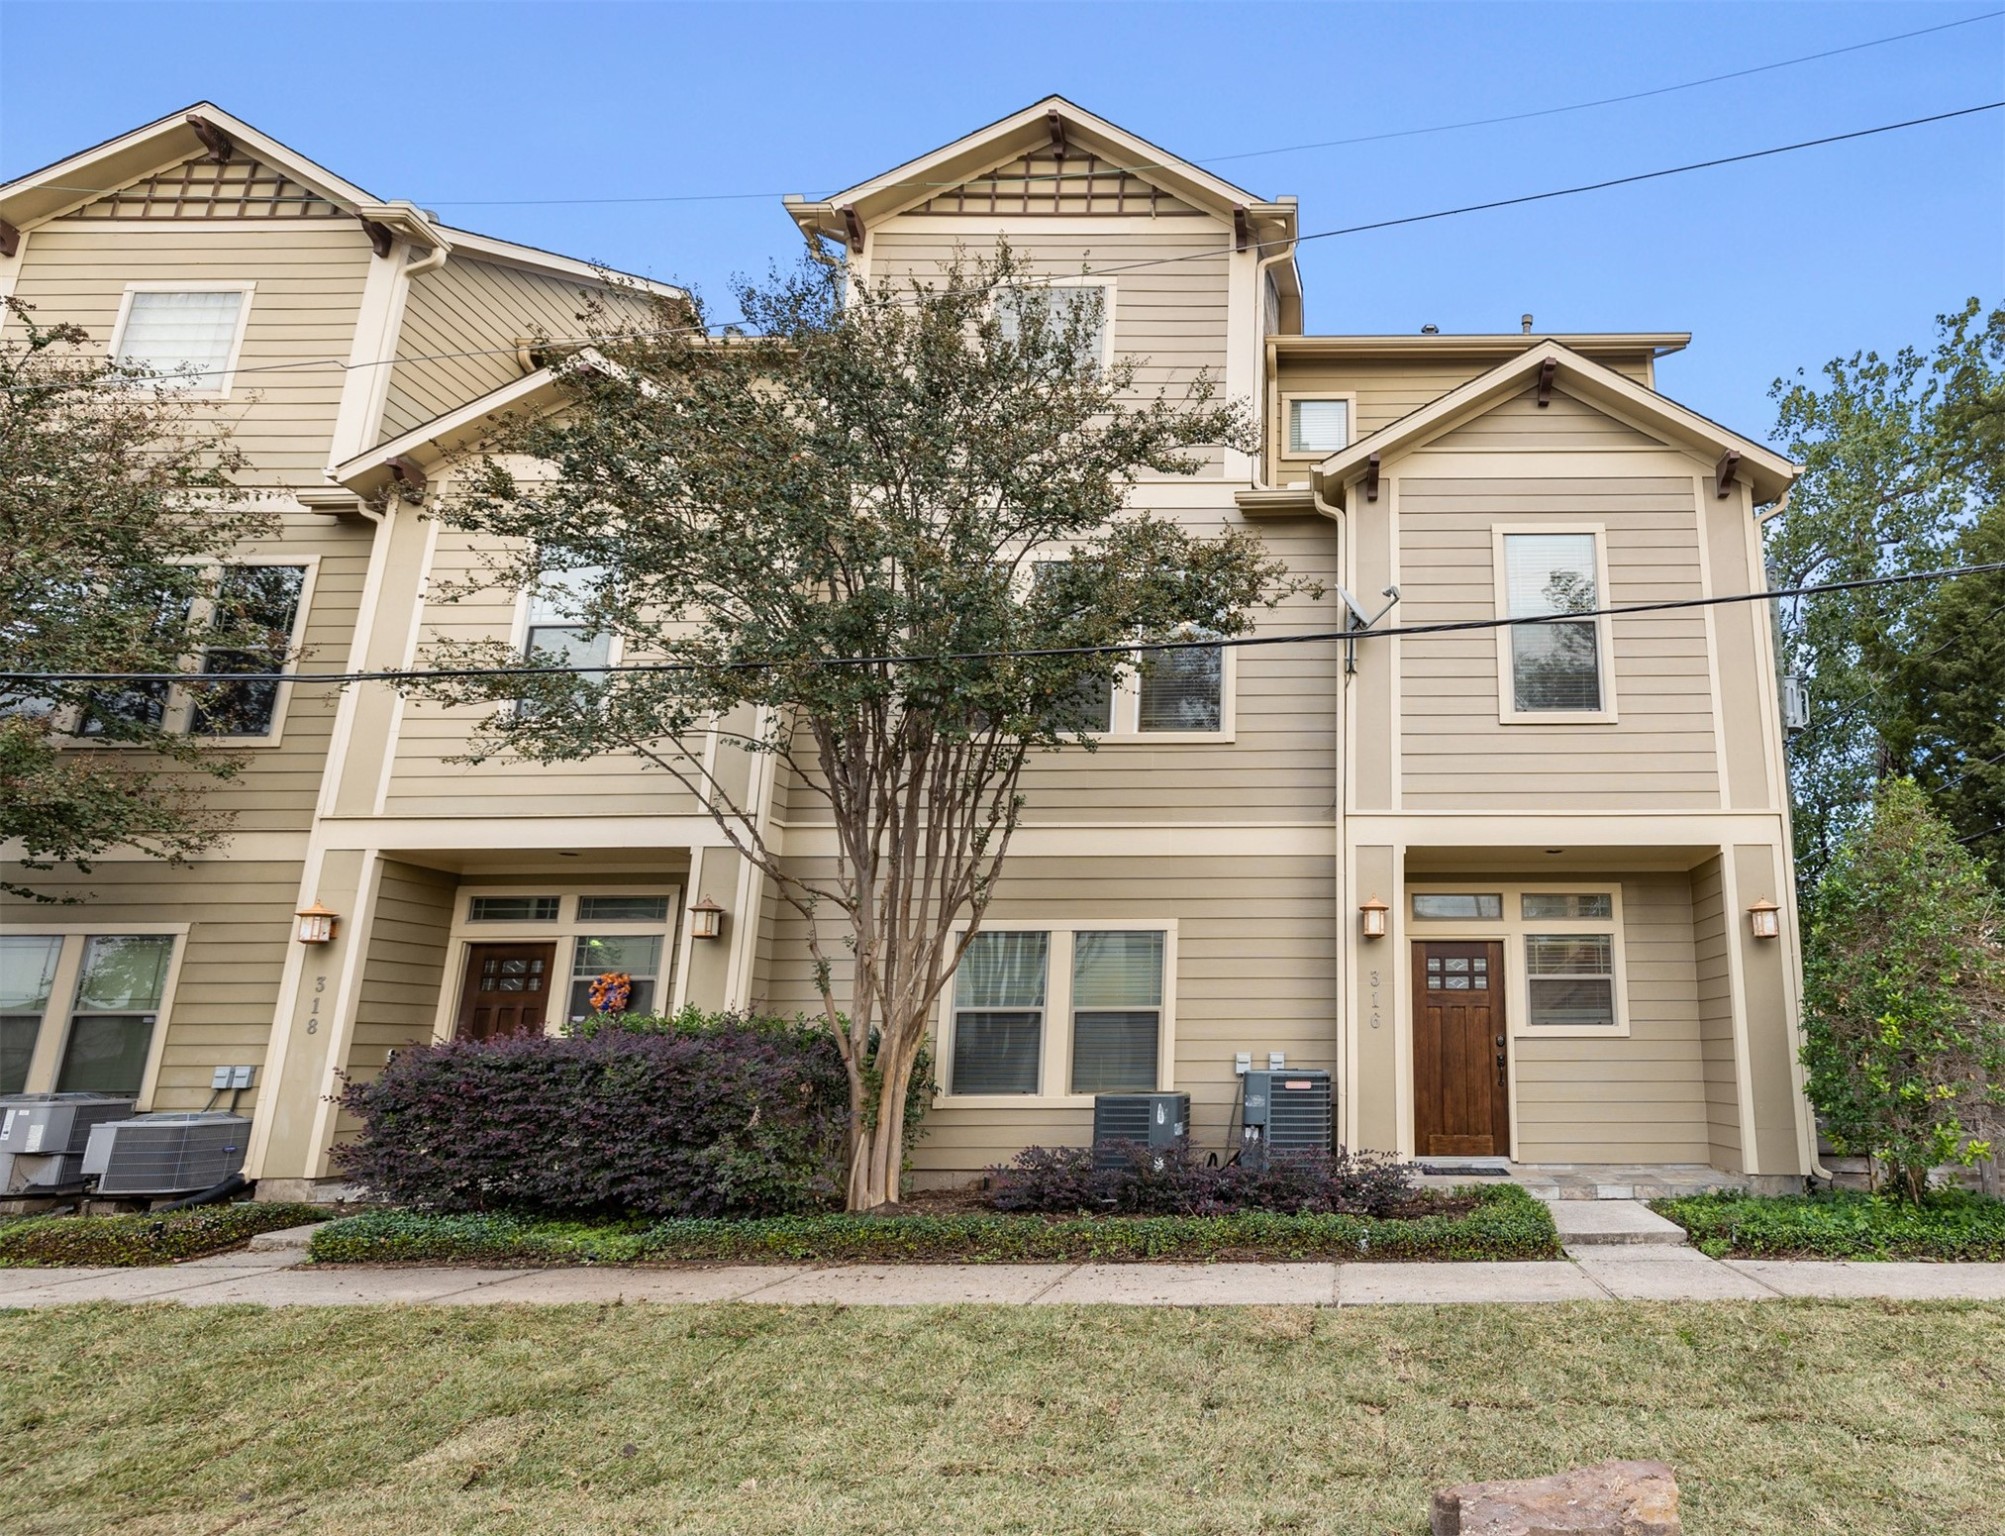 Charming townhome in Jackson Hill area of Rice Military just blocks away from Spotts Park and Johnny Steele Dog Park.